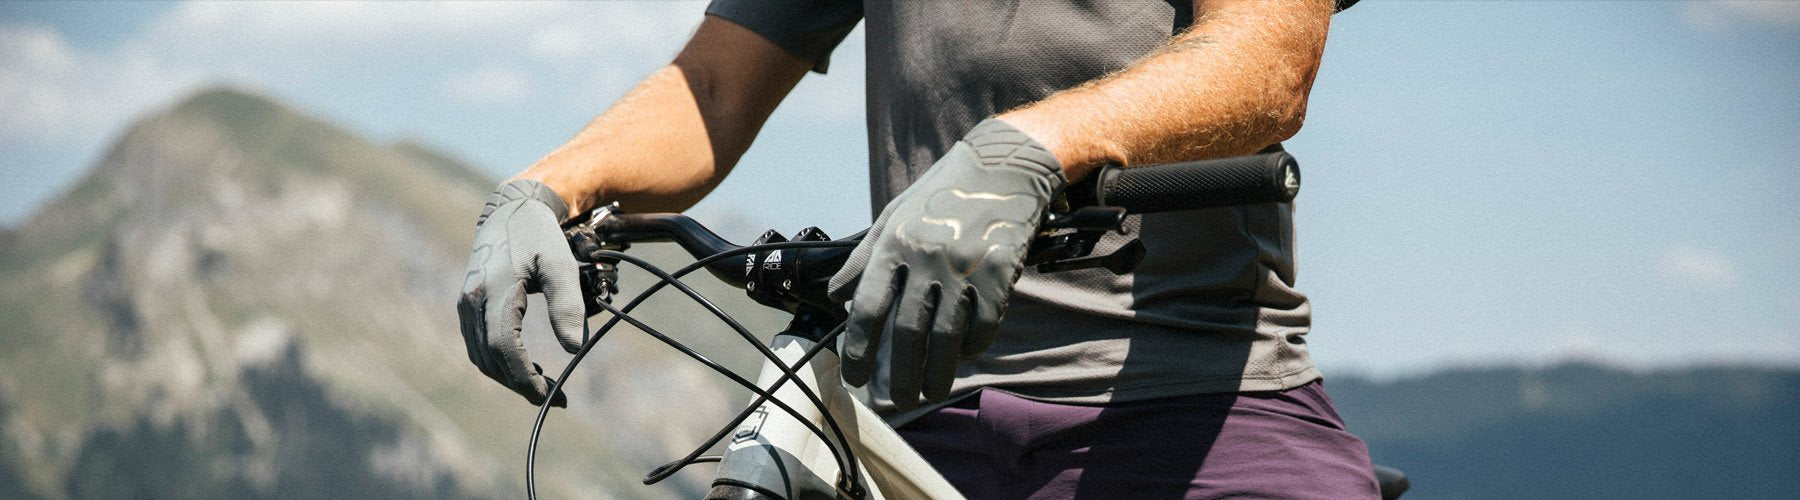 Mountain Bike Gloves Full Finger Touch Screen Gloves Anti-skid Cycling H4H8 